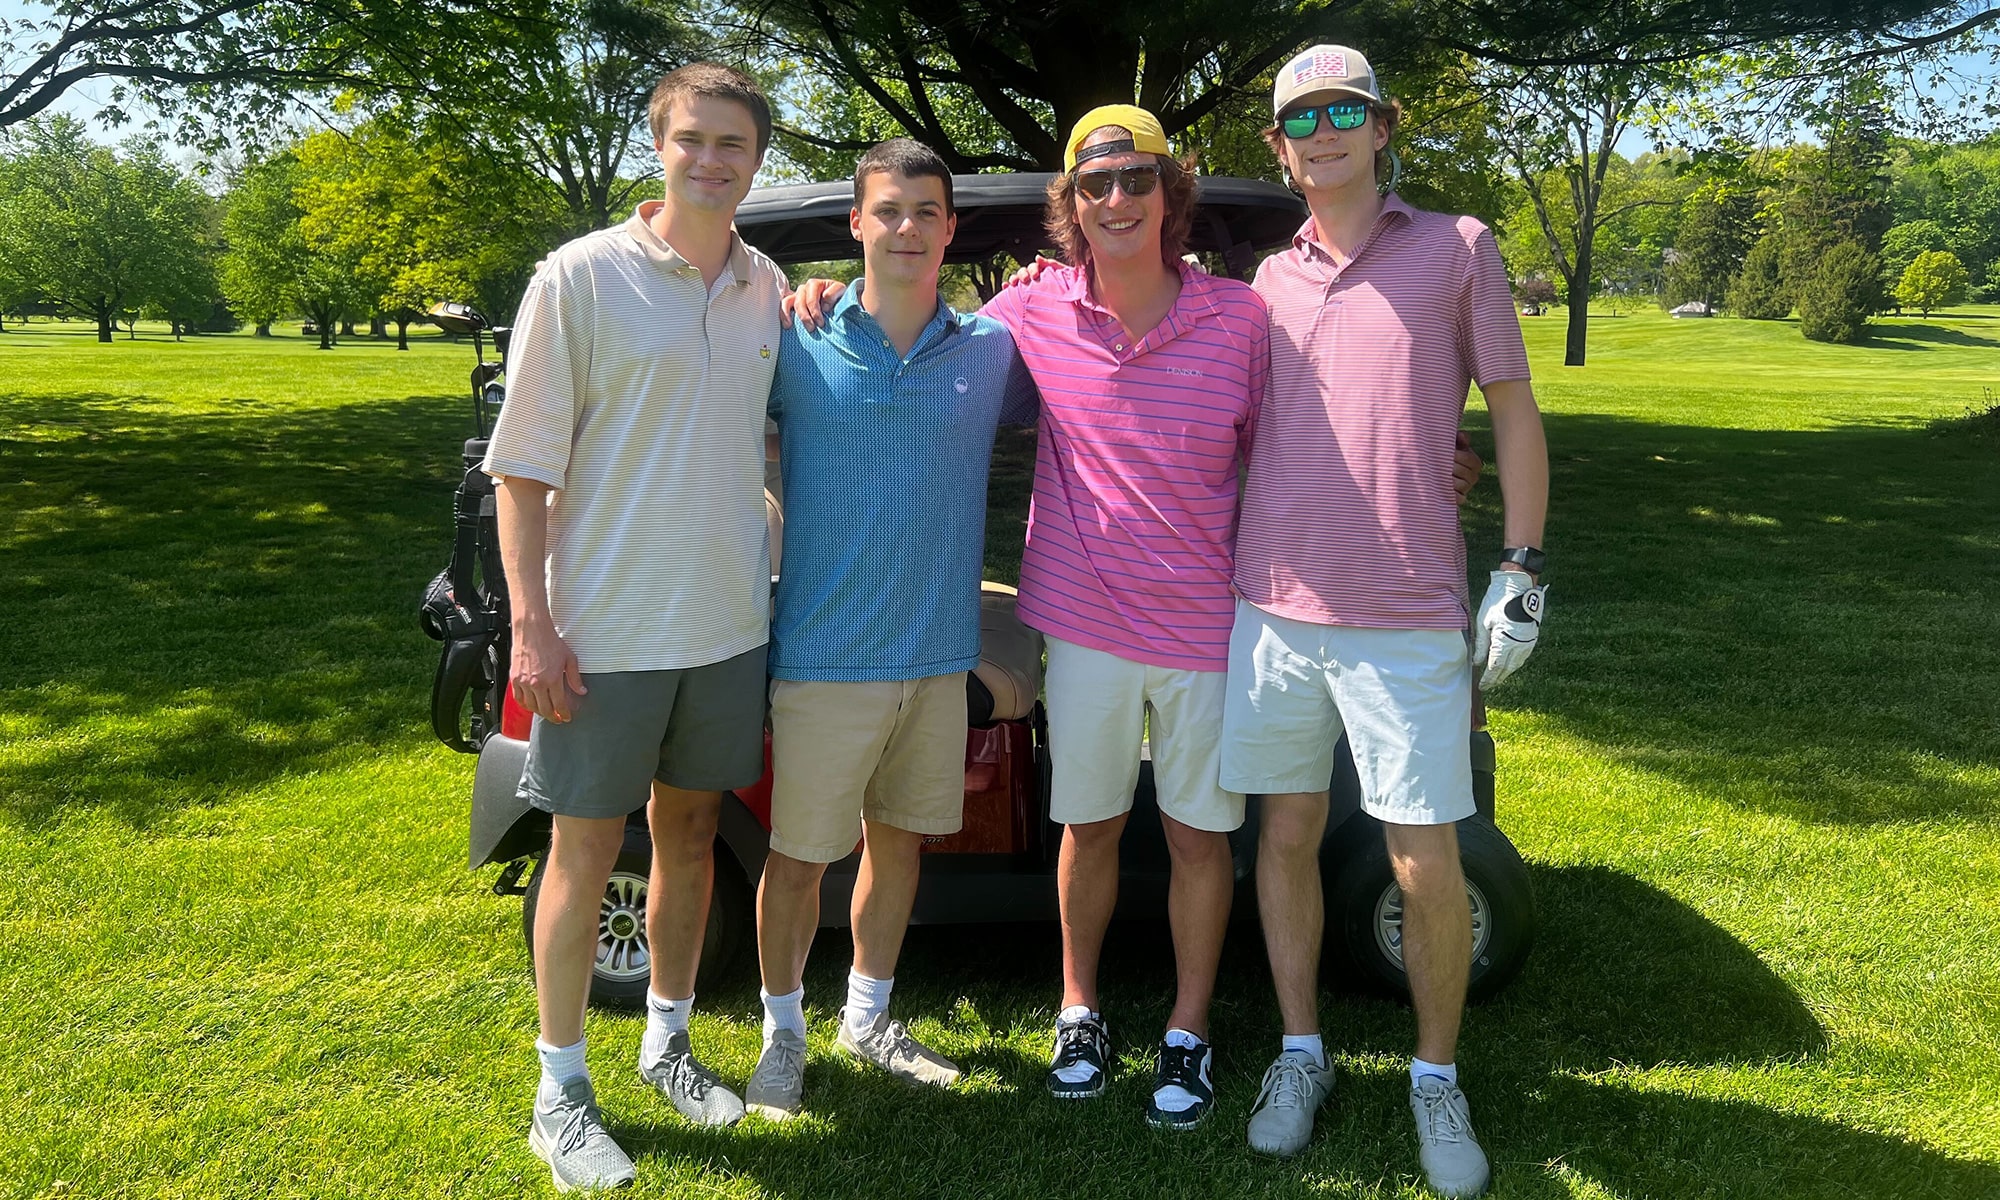 Charlie Gray, Colson Stutz, Nate Swift, and Andrew Fluri at the ز,Ȳַ
######### Golf Course.